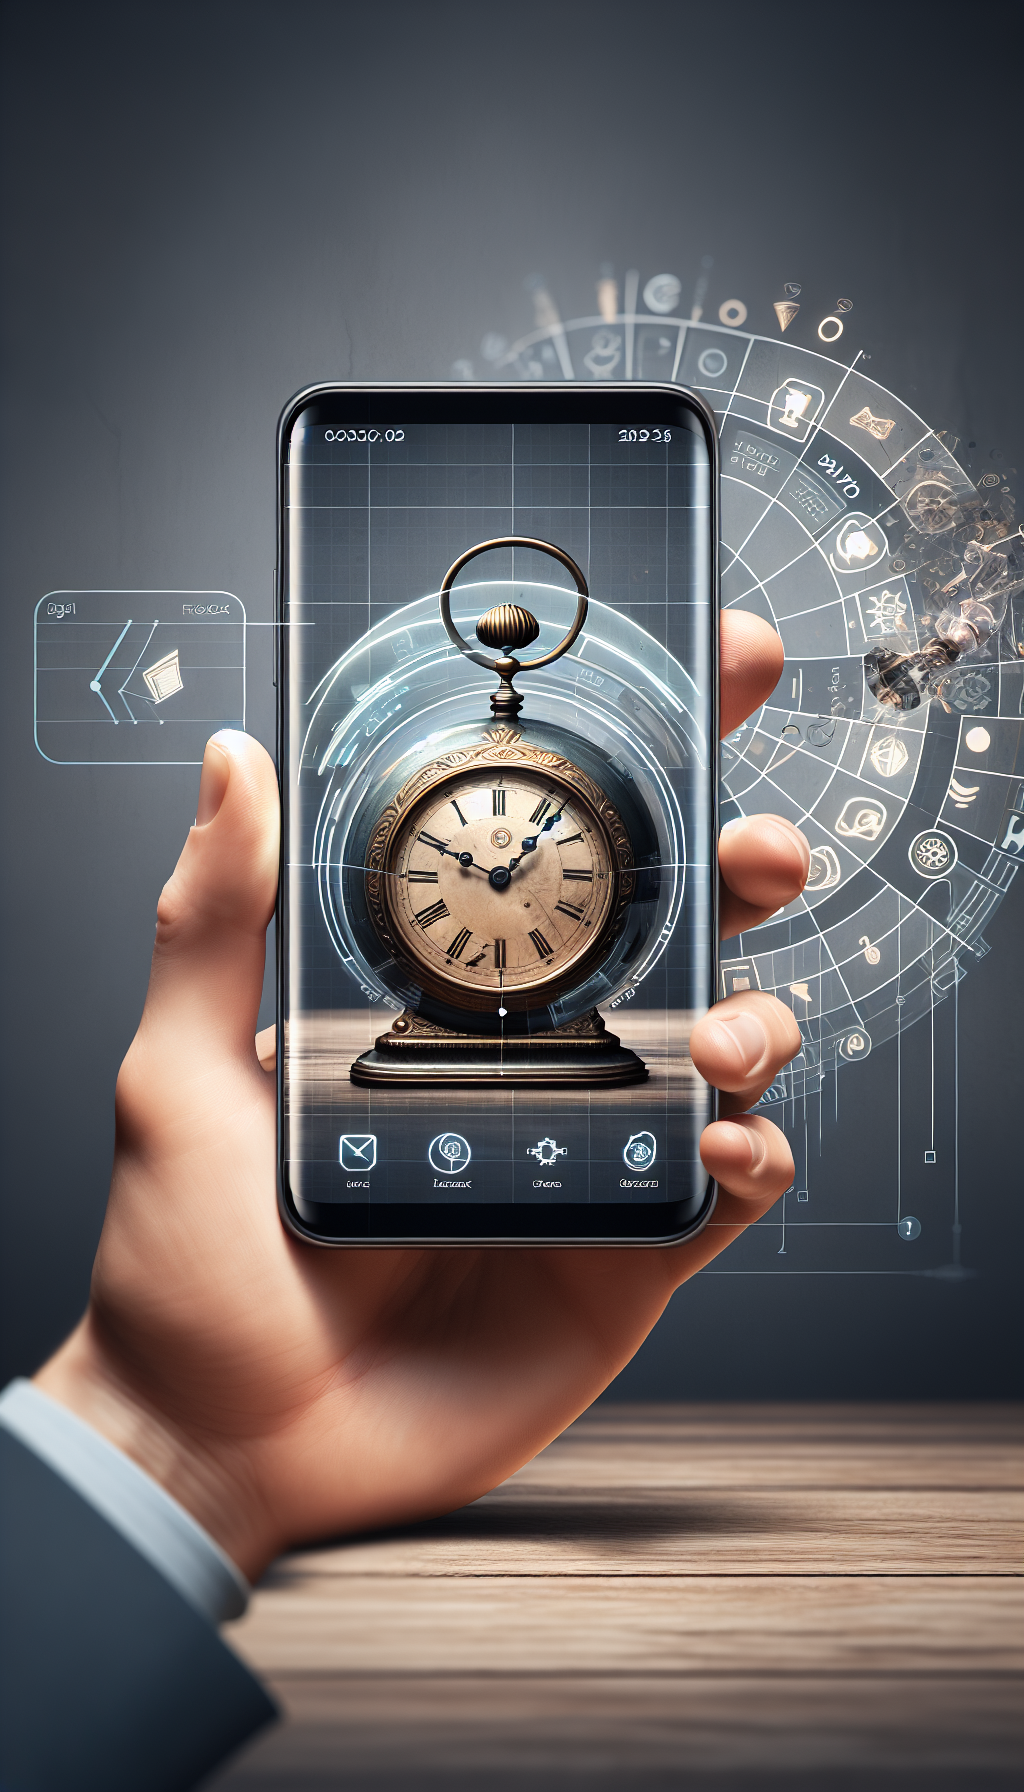 A hand holding a smartphone displaying an antique identification app; from the screen emerges a "holographic" expert appraiser, inspecting a 3D vintage clock. Digital icons representing app insights swirl around the clock, suggesting real-time data analysis. The style juxtaposes the modern, sleek smartphone design against the Victorian intricacy of the holographic clock and appraiser, embodying the fusion of technology and traditional expertise.